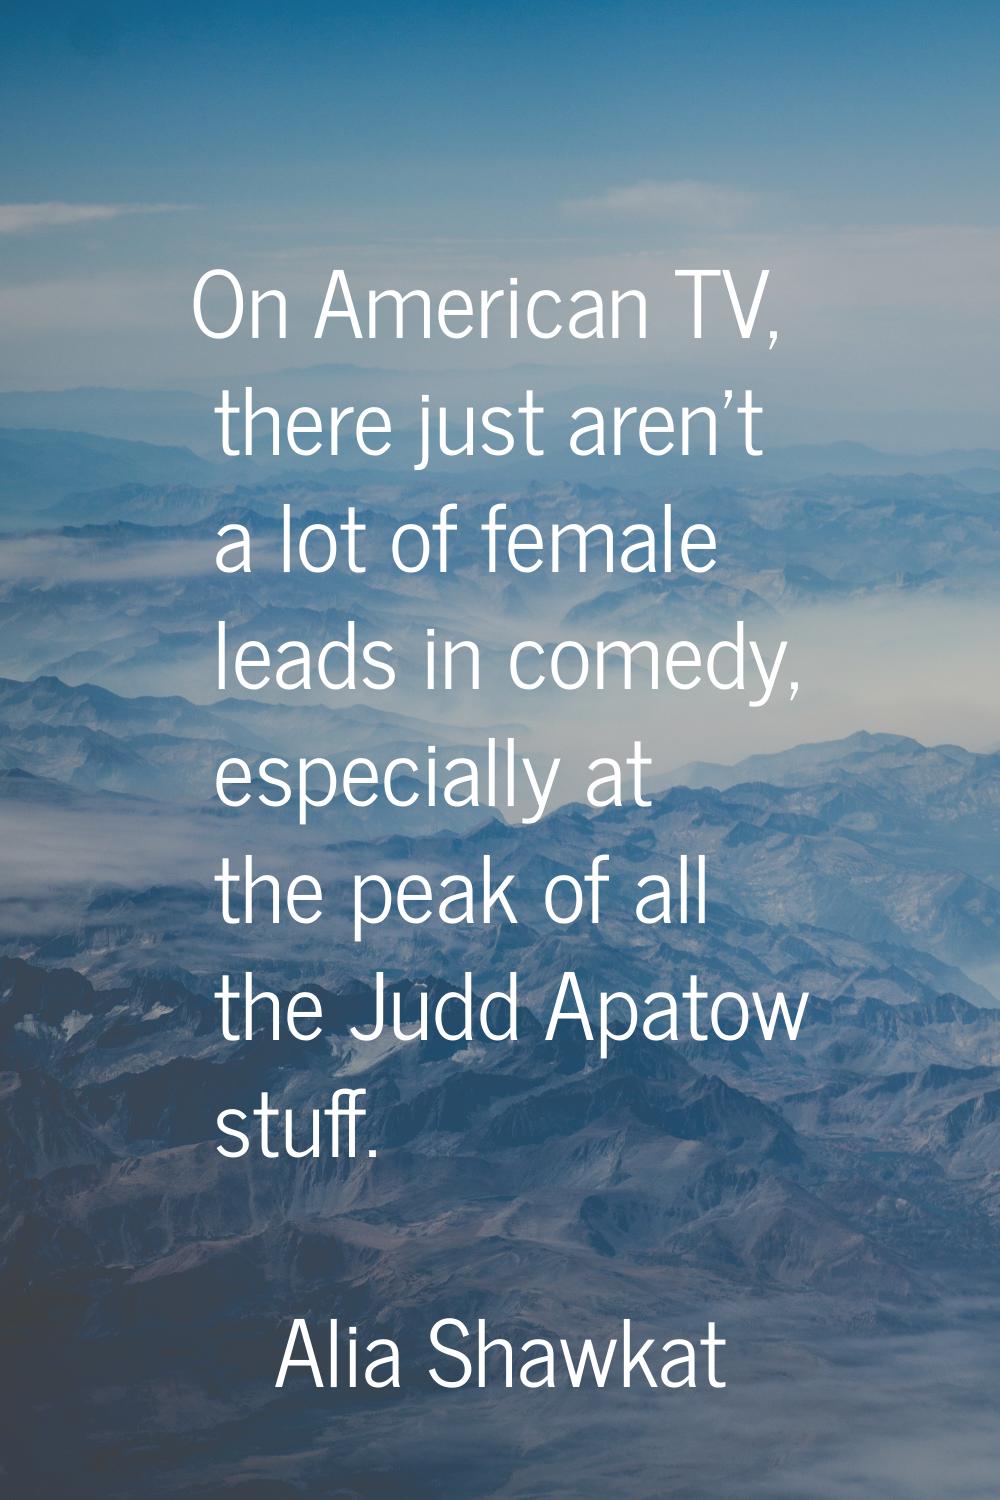 On American TV, there just aren't a lot of female leads in comedy, especially at the peak of all th